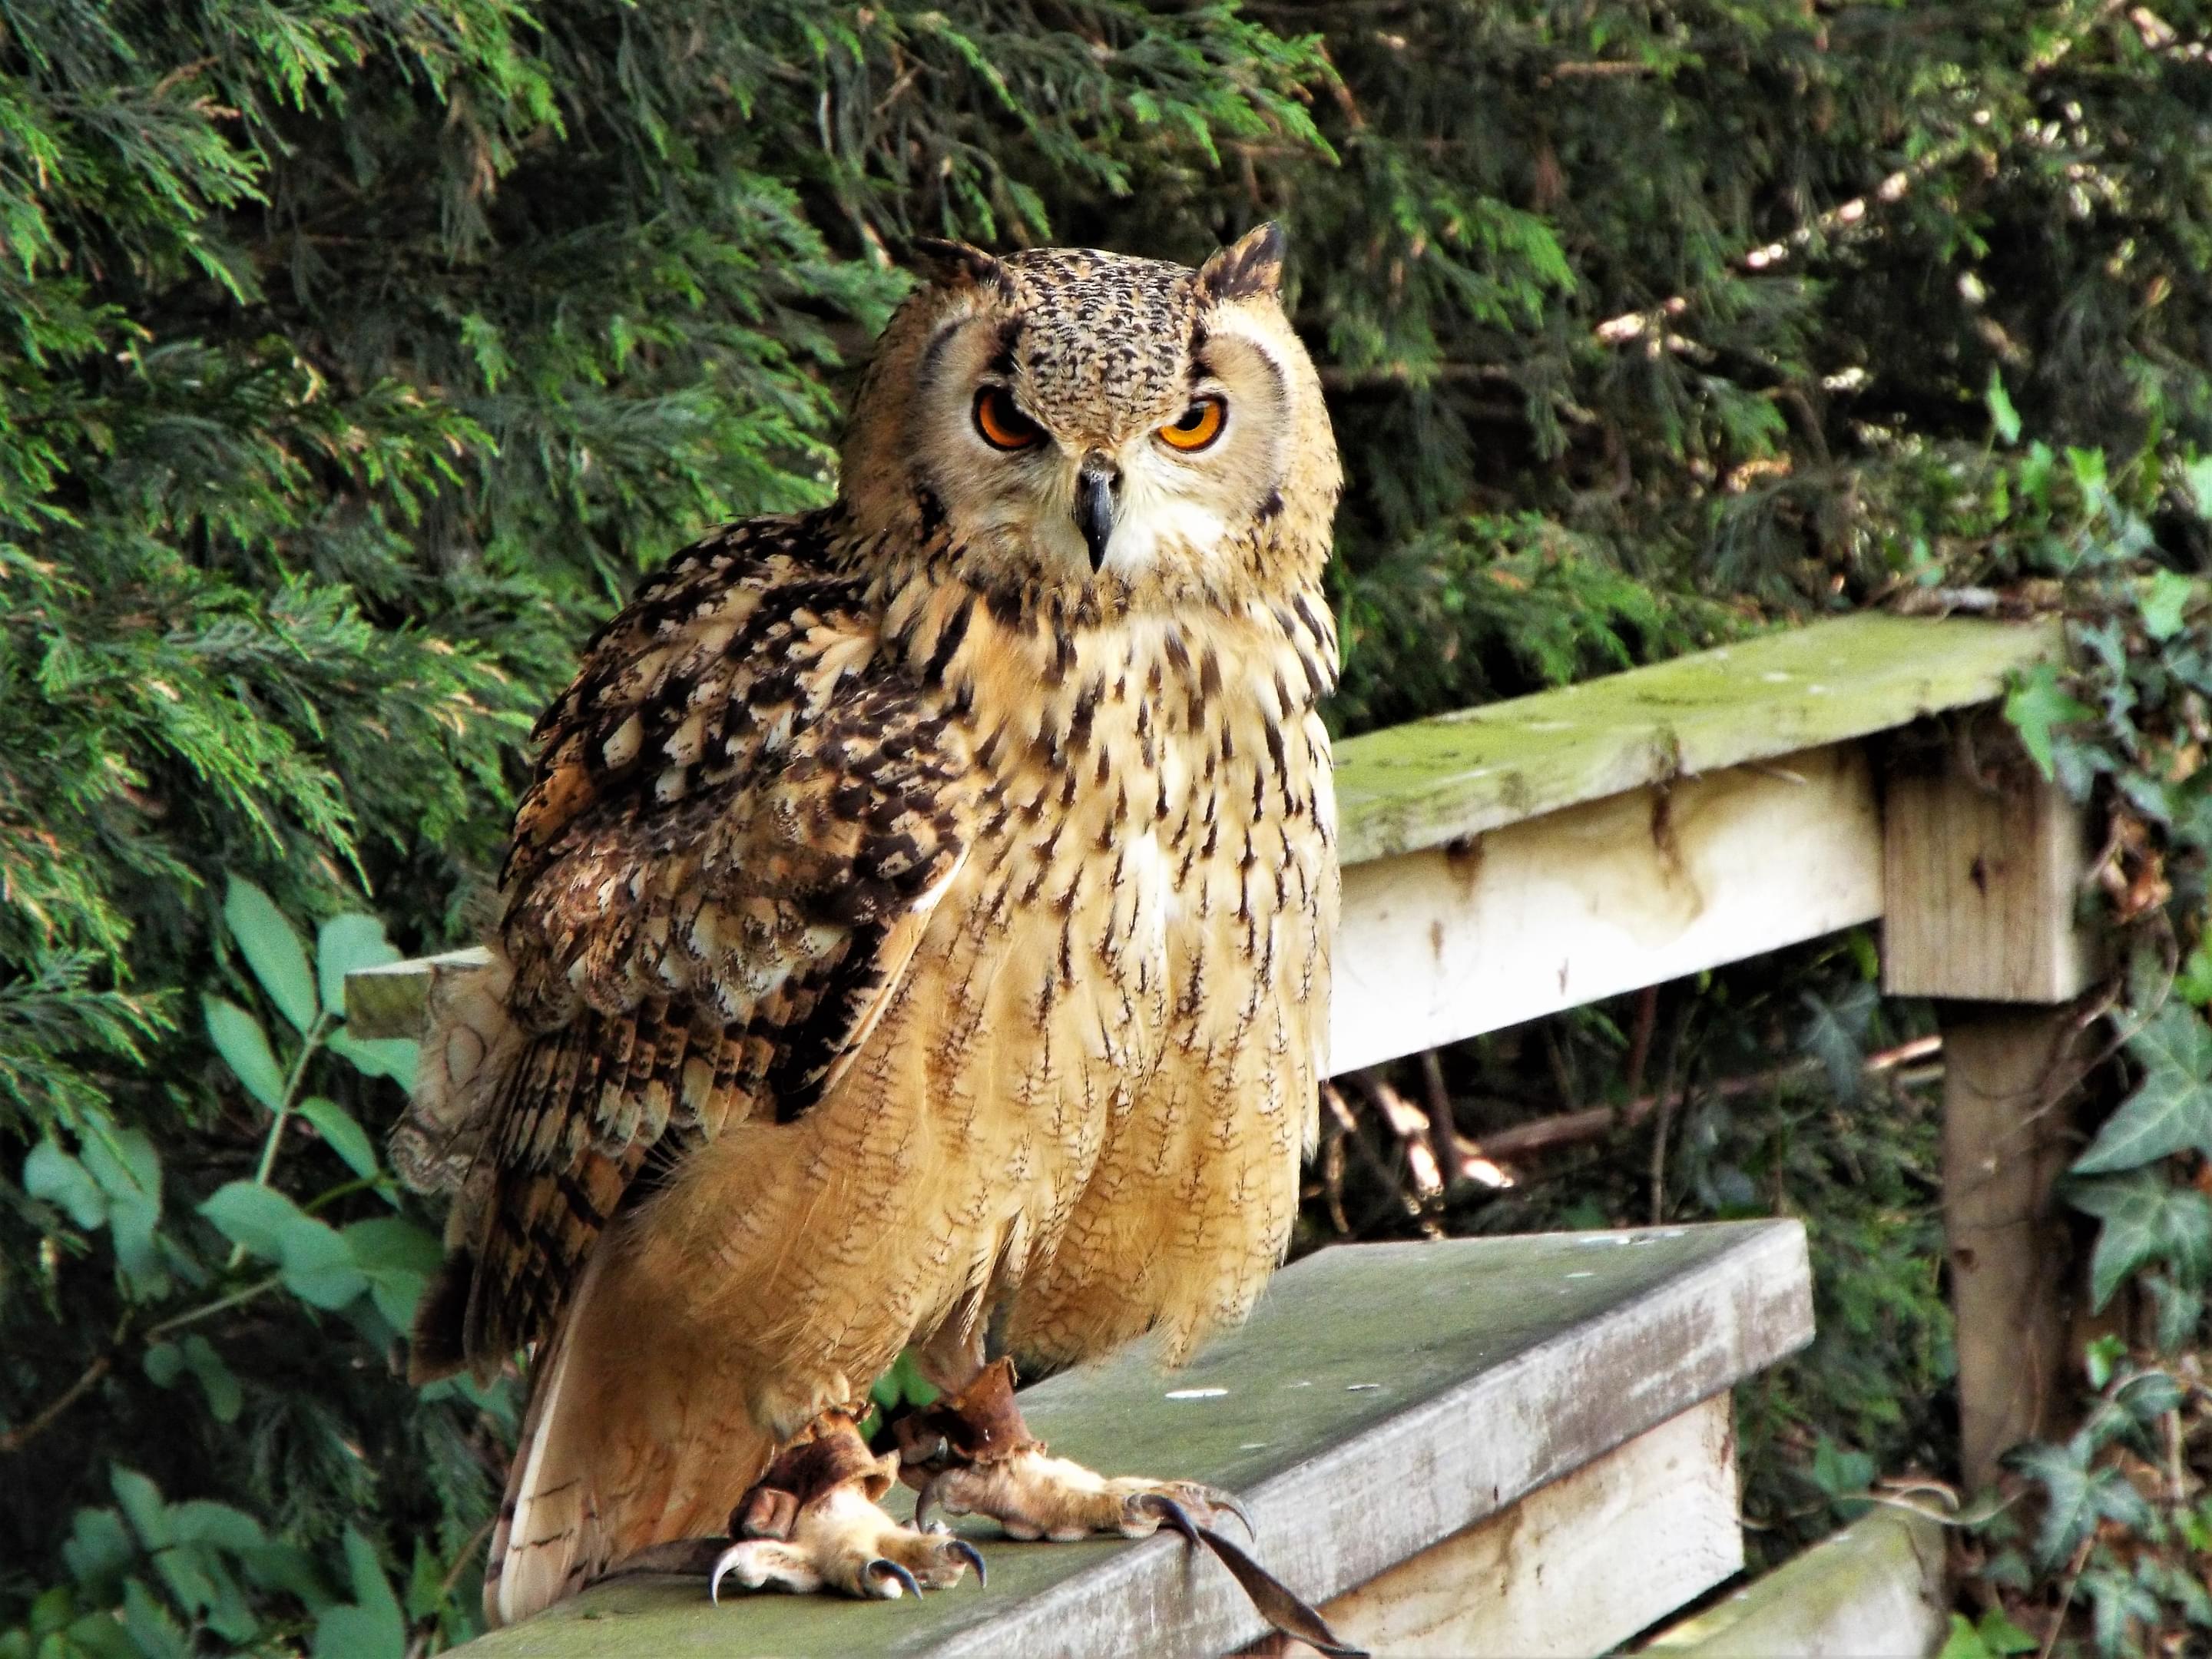 Turbary Woods Owl And Bird Of Prey Sanctuary Overview